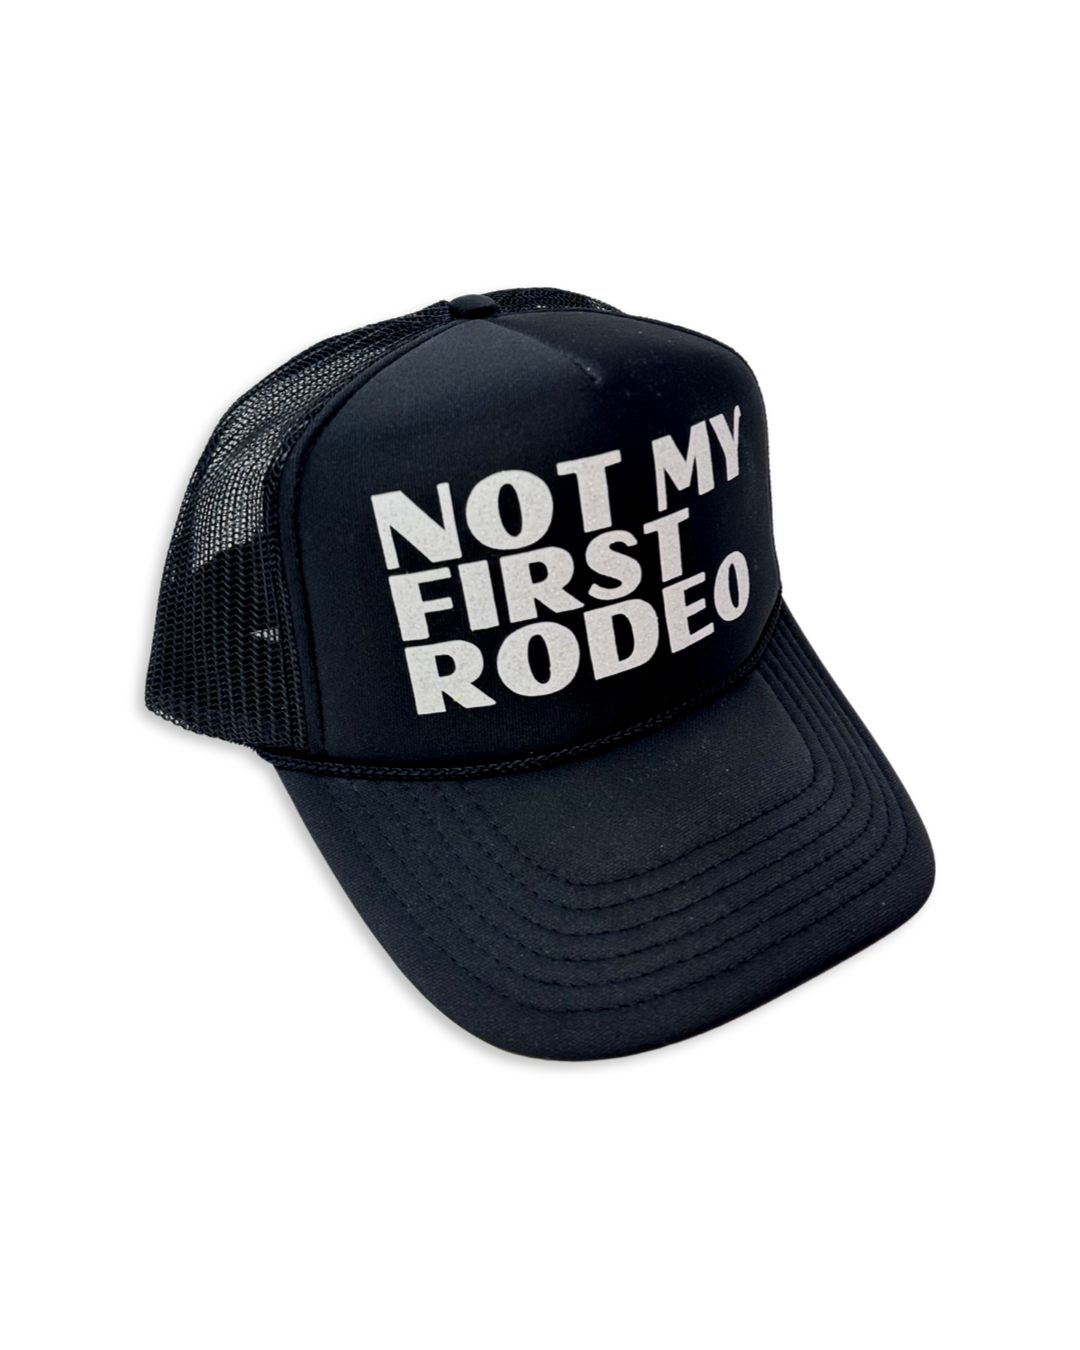 Rodeo Hat in Black